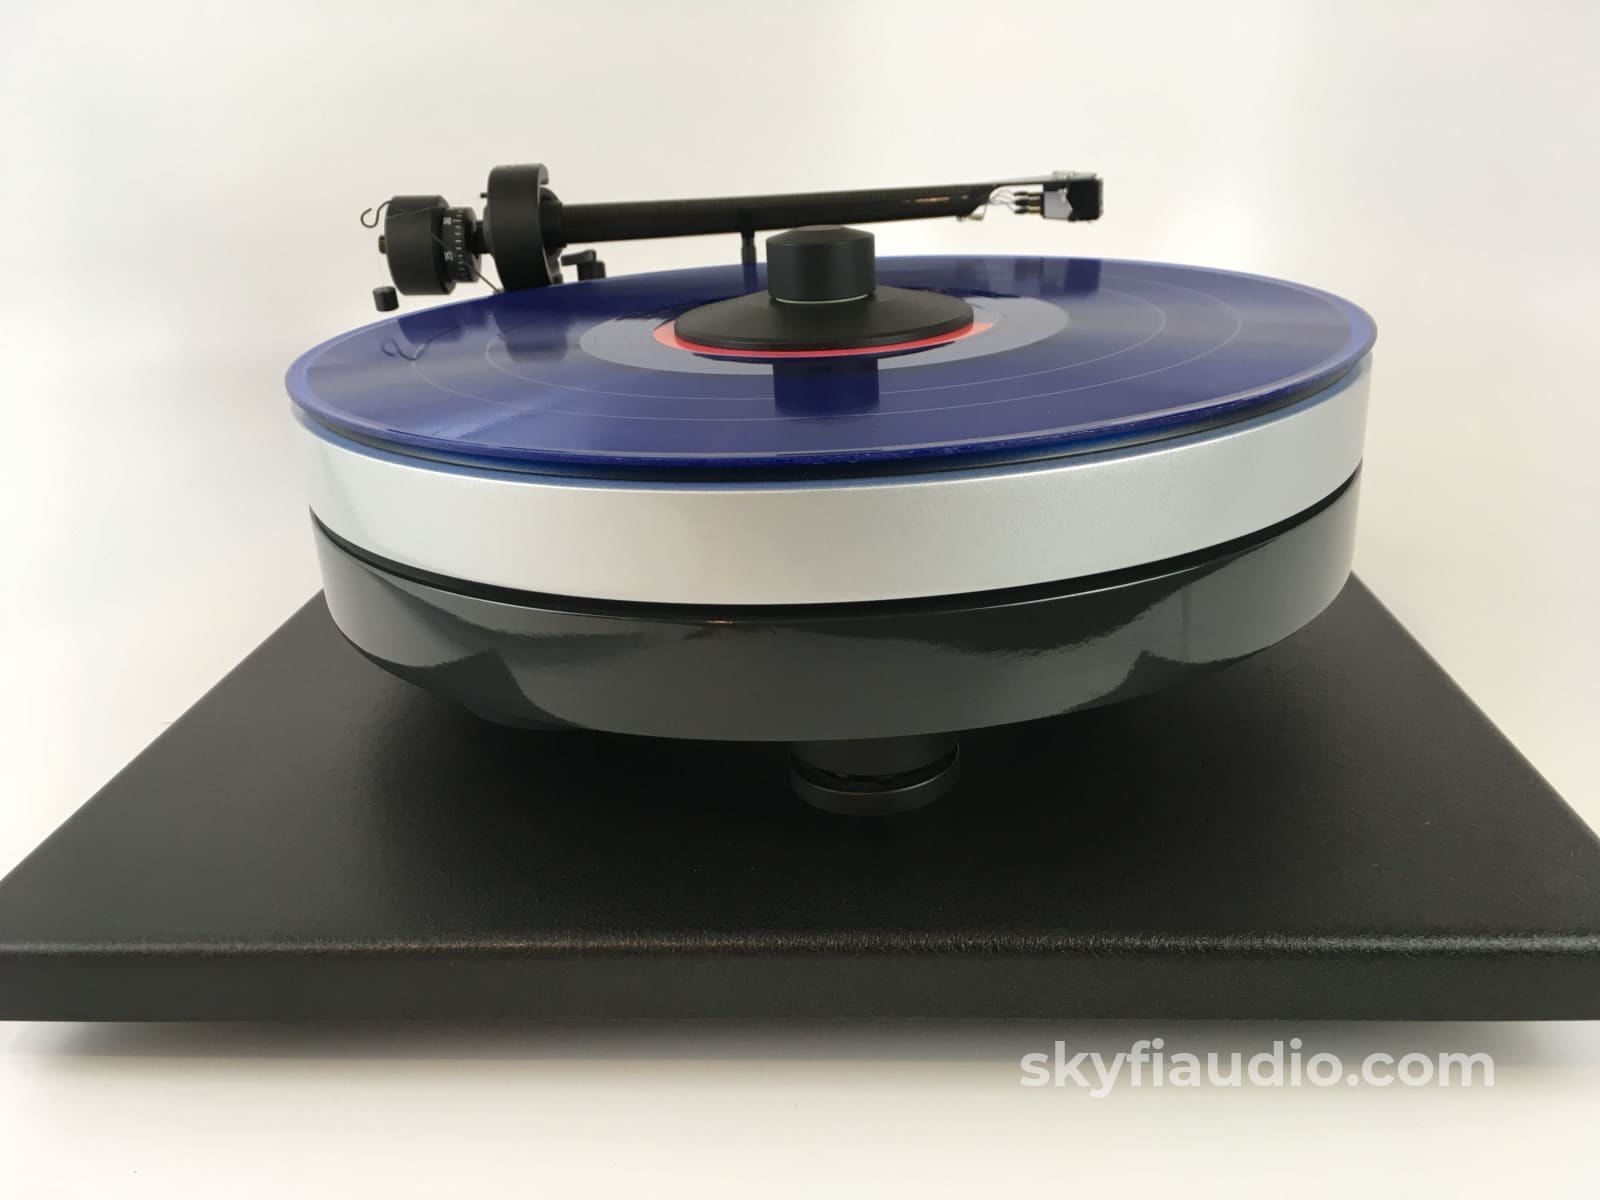 Pro-Ject Audio Rm-5 Se Turntable With New Grado Cartridge And Seismic Sink Base